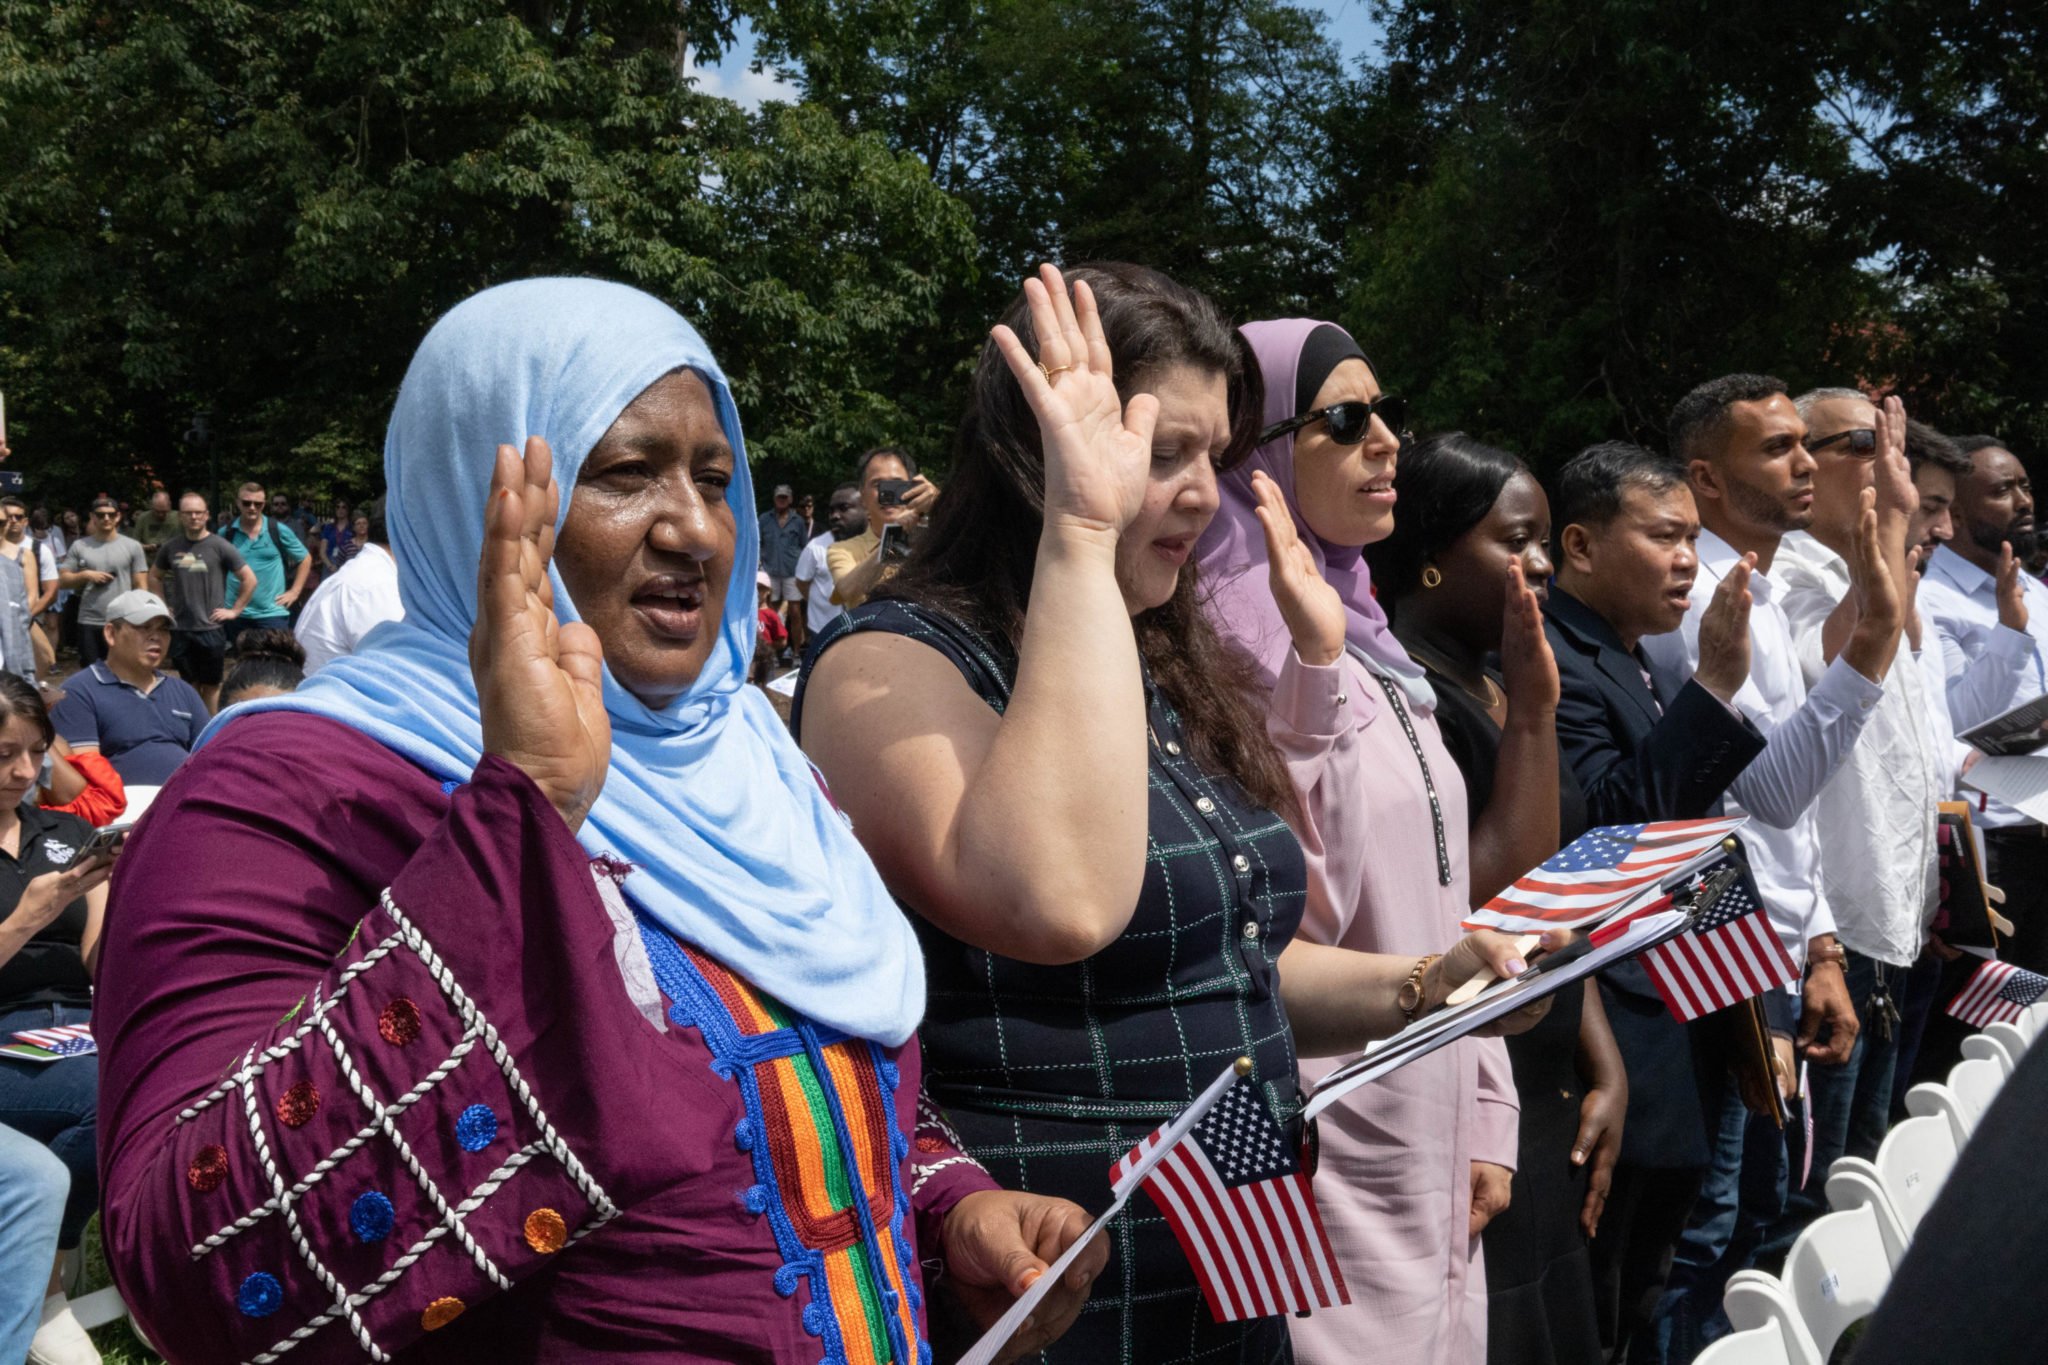 PHOTOS: The Fourth of July Naturalization Ceremony at Mount Vernon